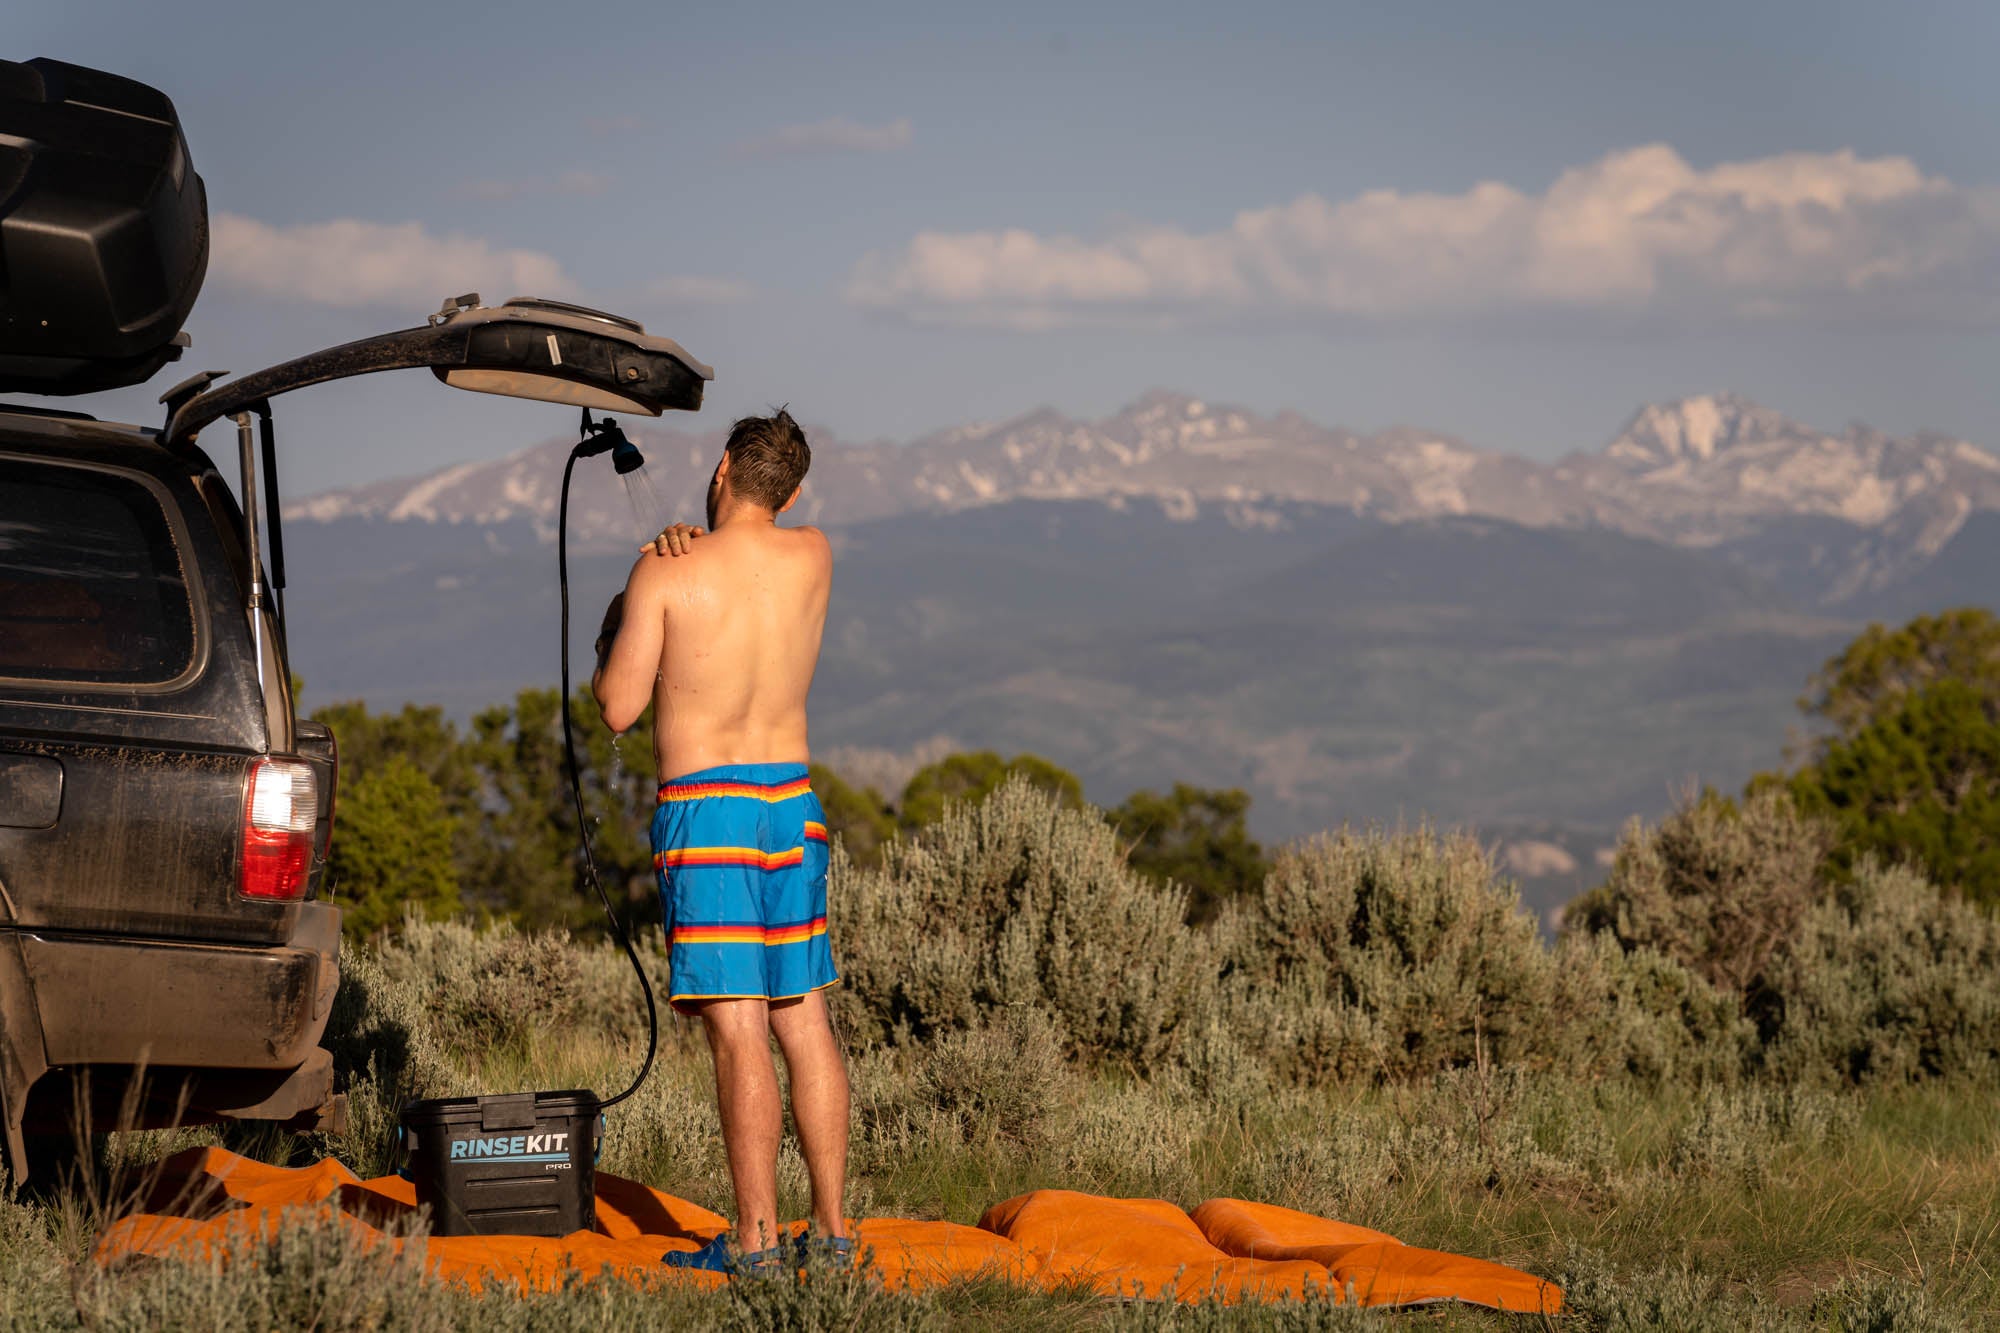 The Best Camping Shower Tents For Your Next Trip